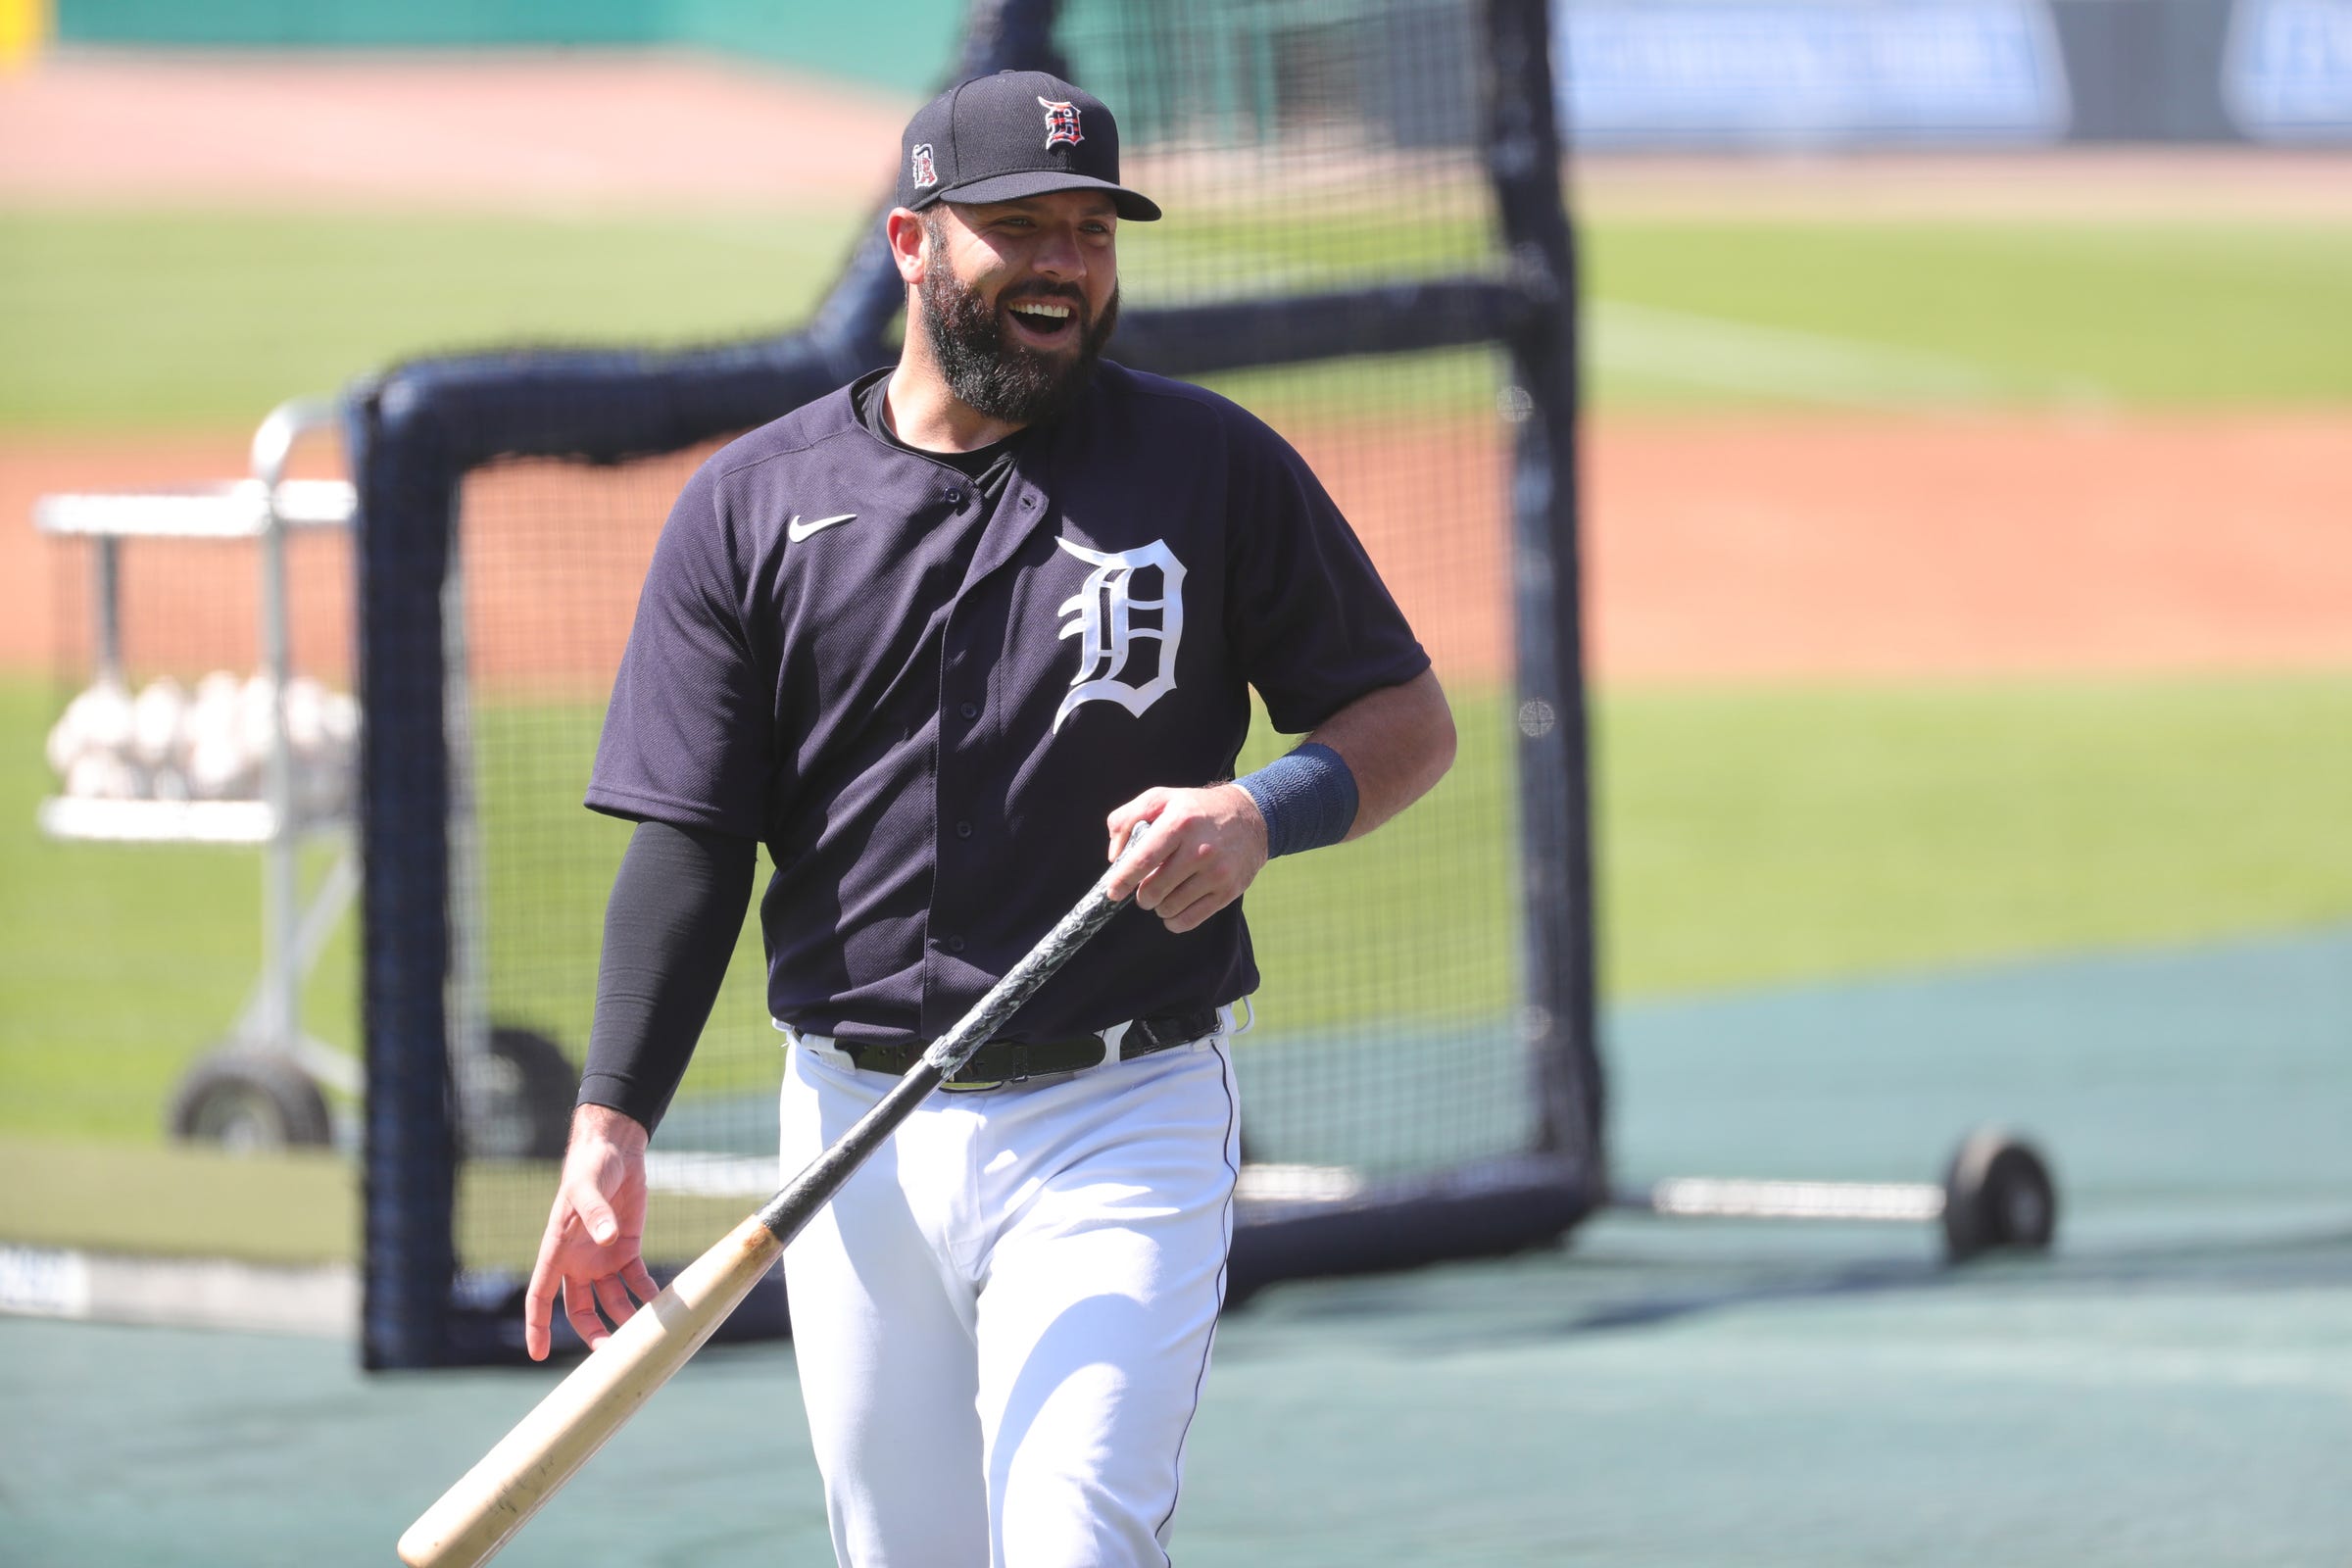 Detroit Tigers catcher Austin Romine walks off the field after batting practice at Comerica Park on July 5, 2020.